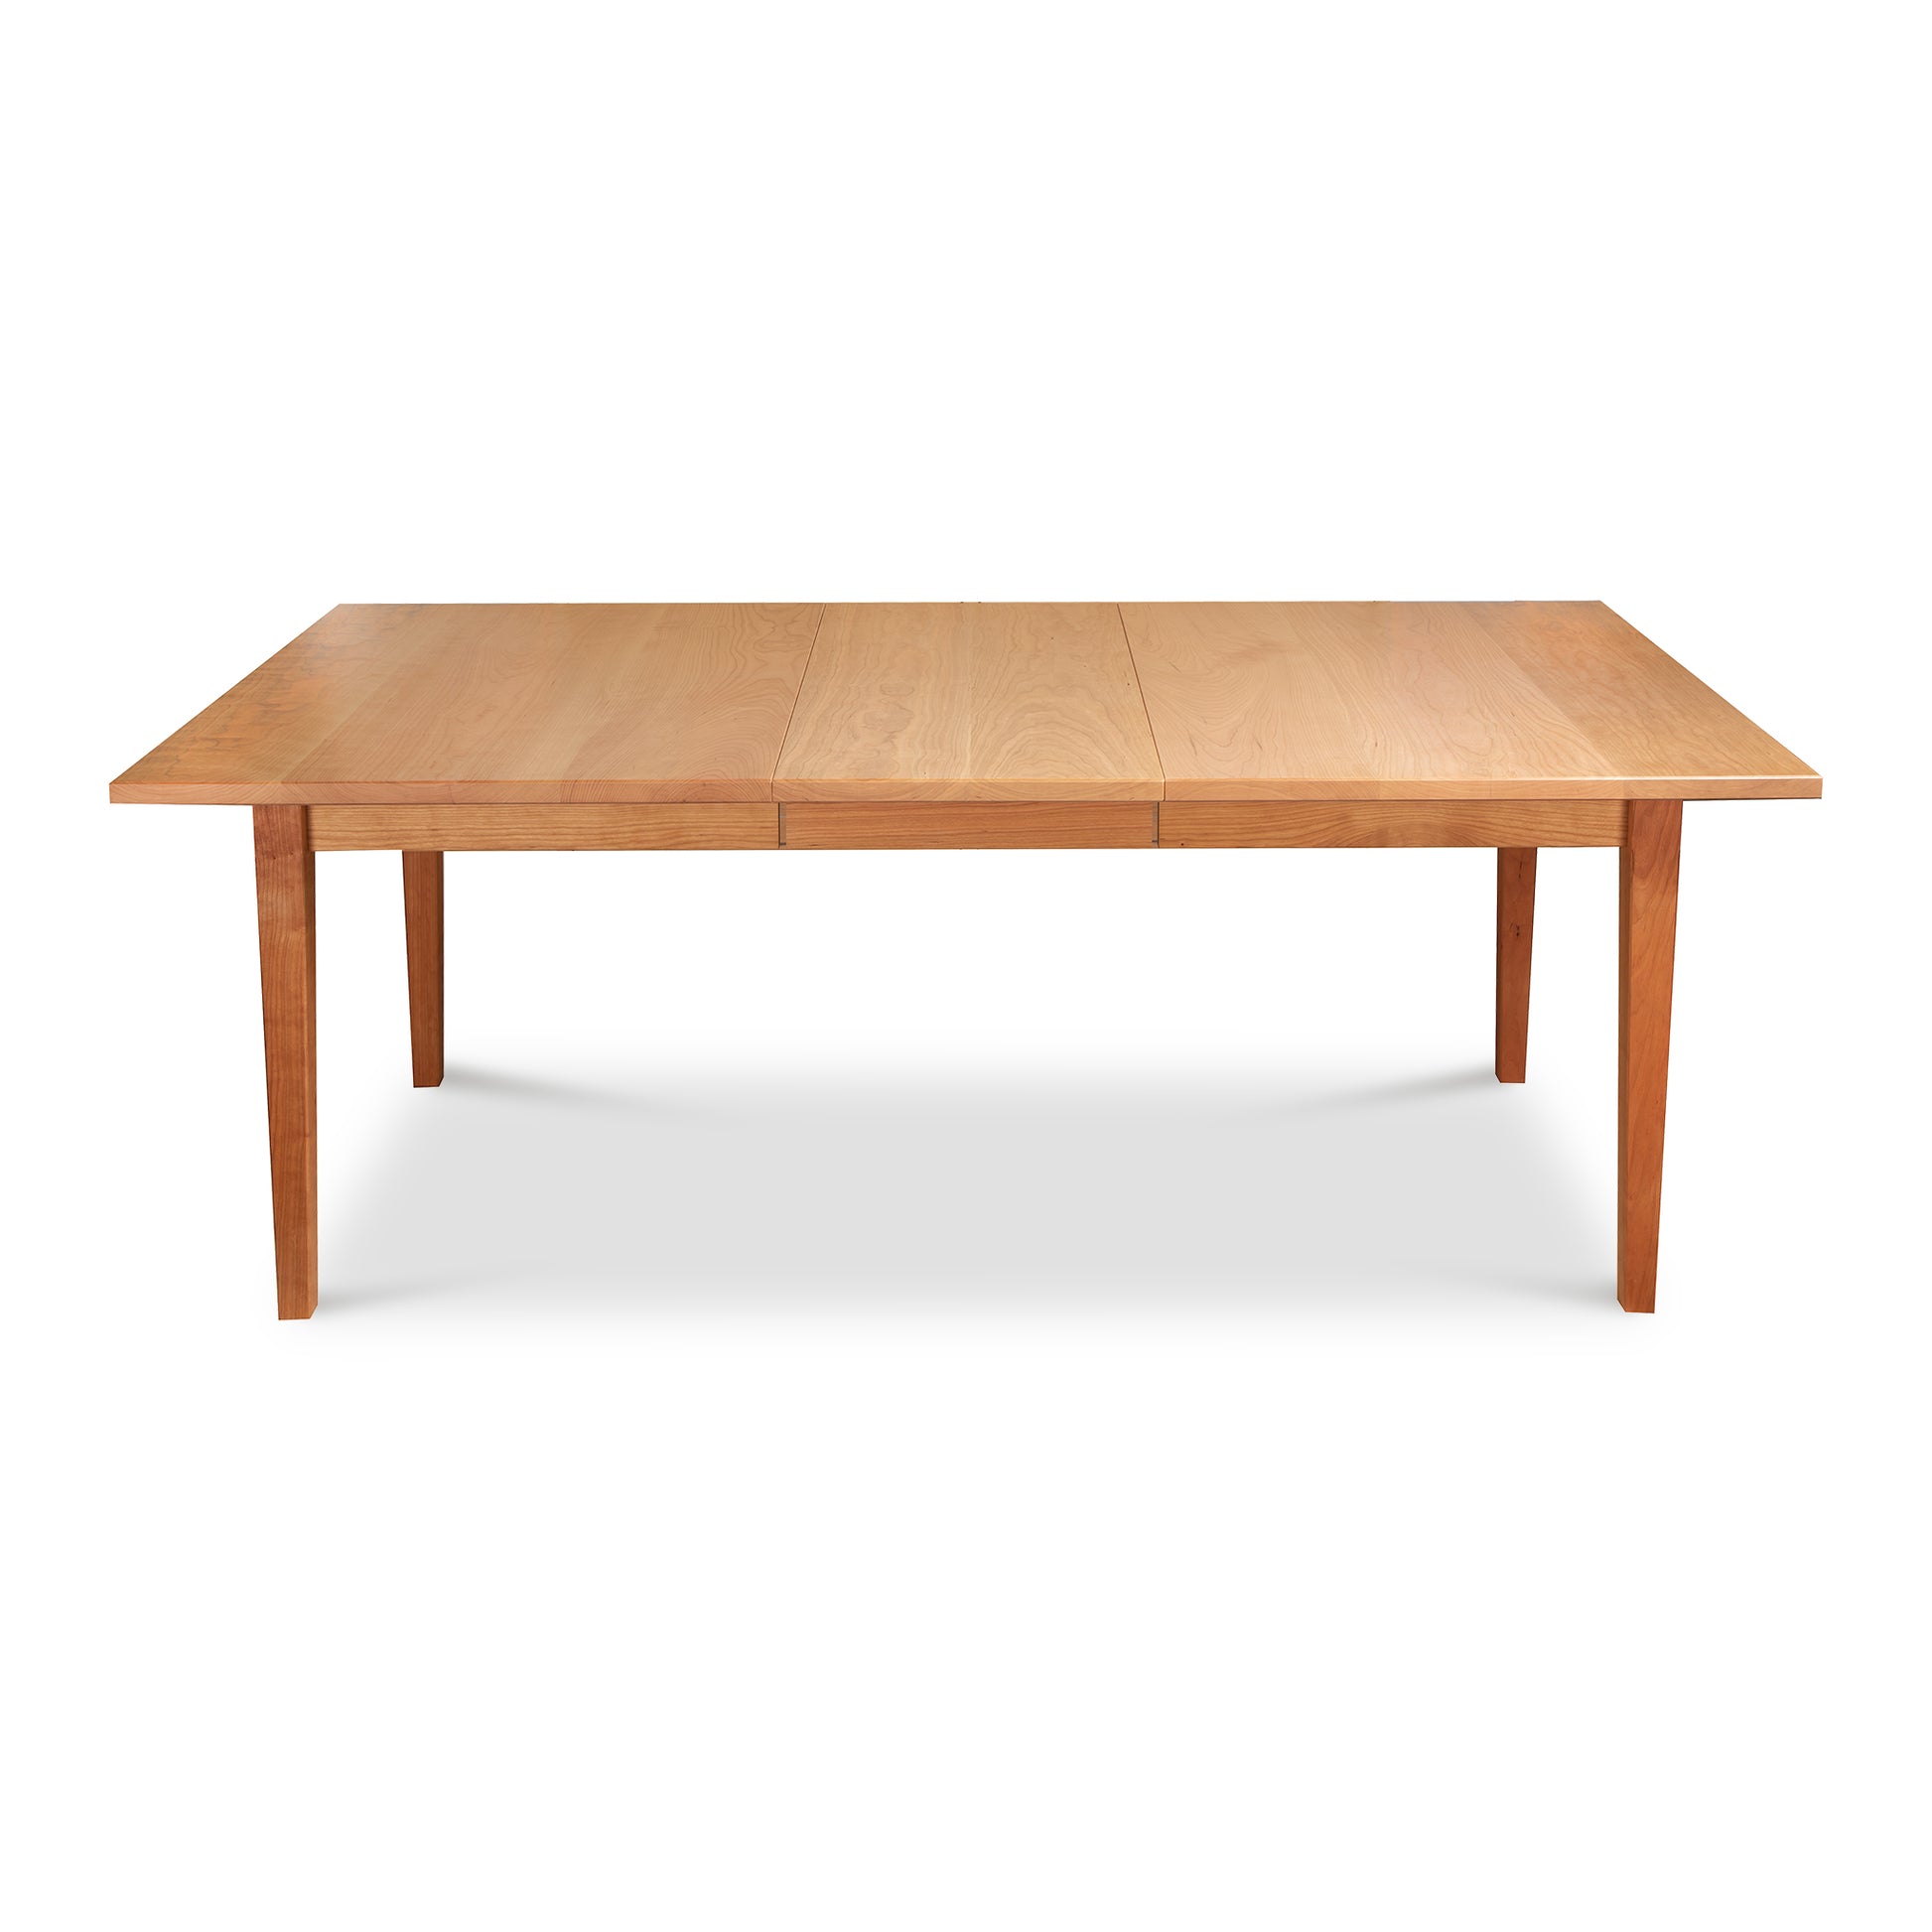 A solid wood Maple Corner Woodworks Vermont Shaker Rectangular Extension Dining Table with a handcrafted wooden top.